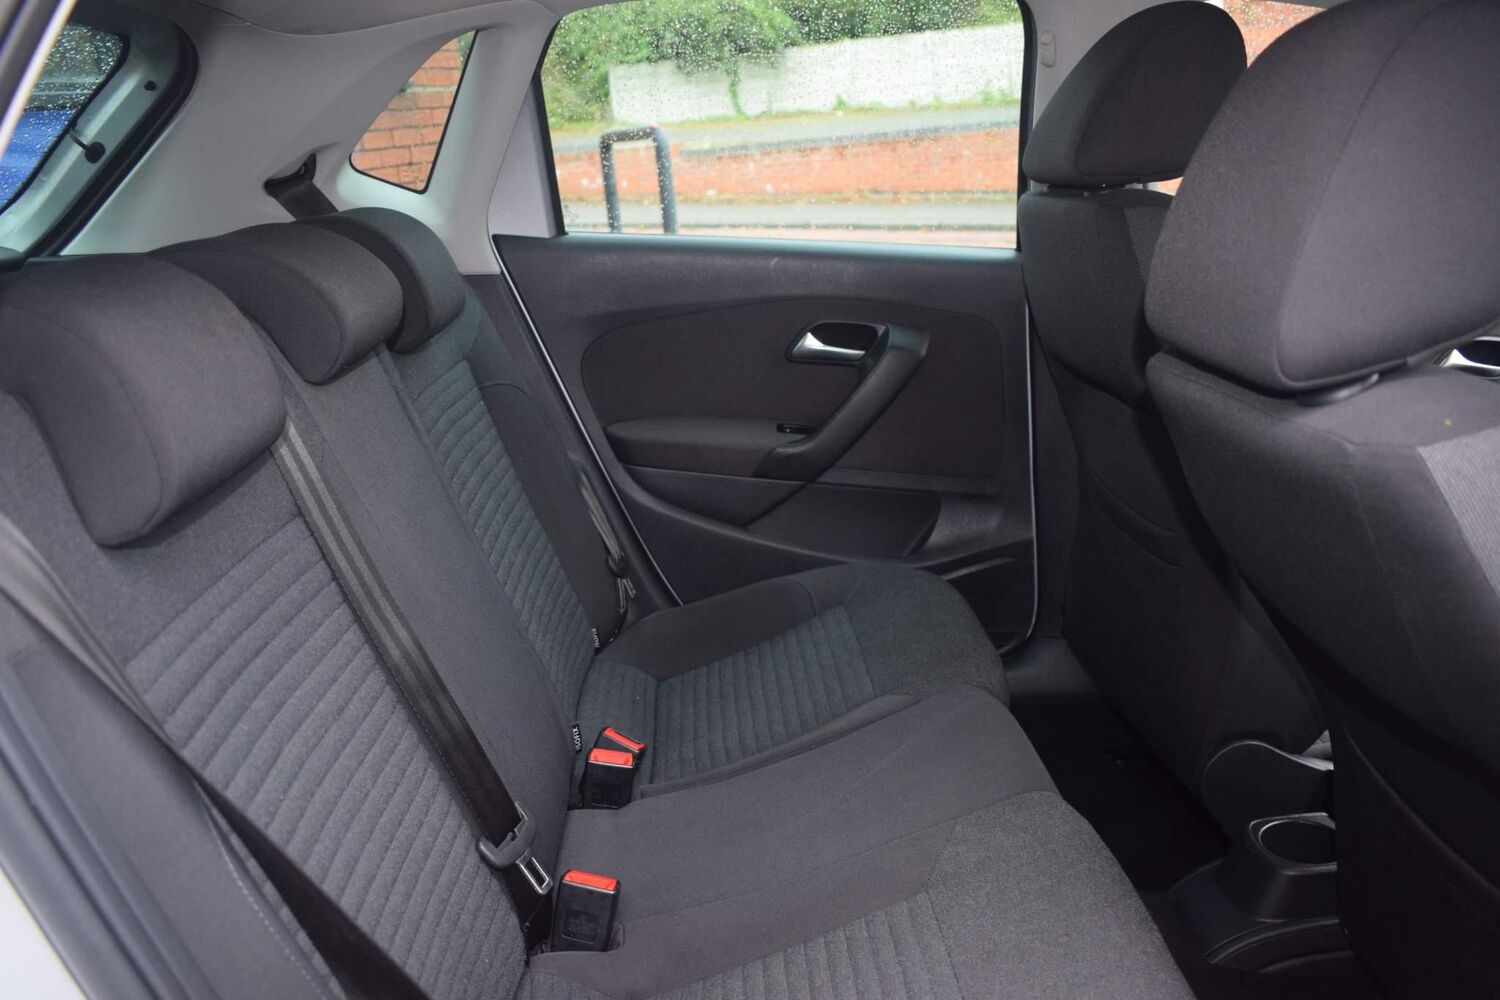 Rear seat view on Volkswagen Polo  Car seats, Volkswagen polo, Car  accessories